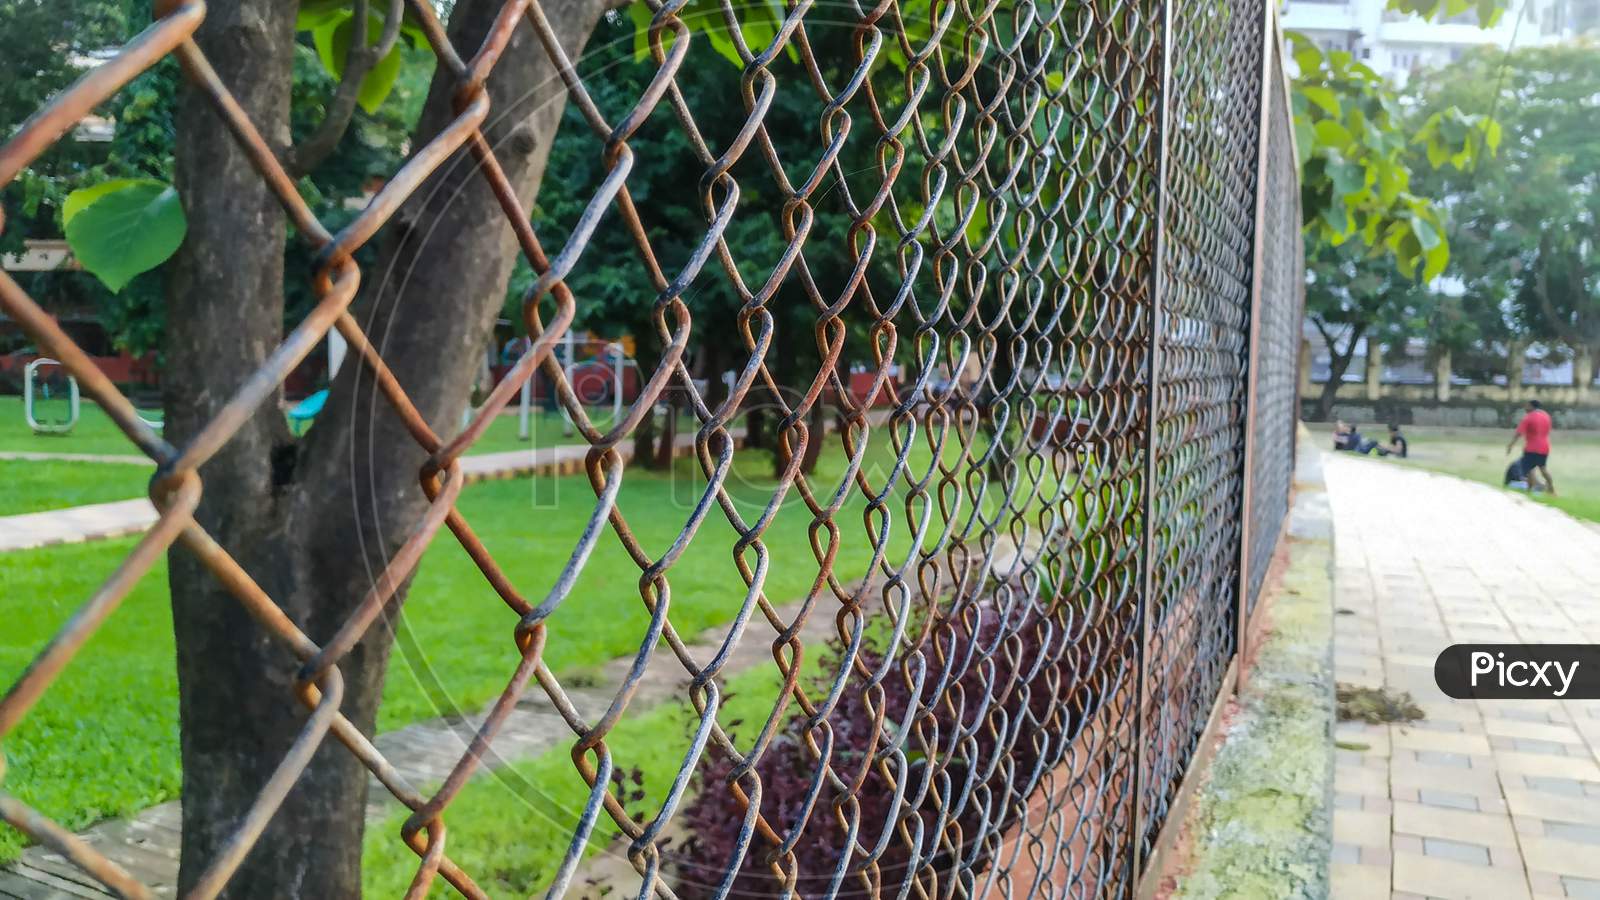 Iron Fencing in Park with Green Background.